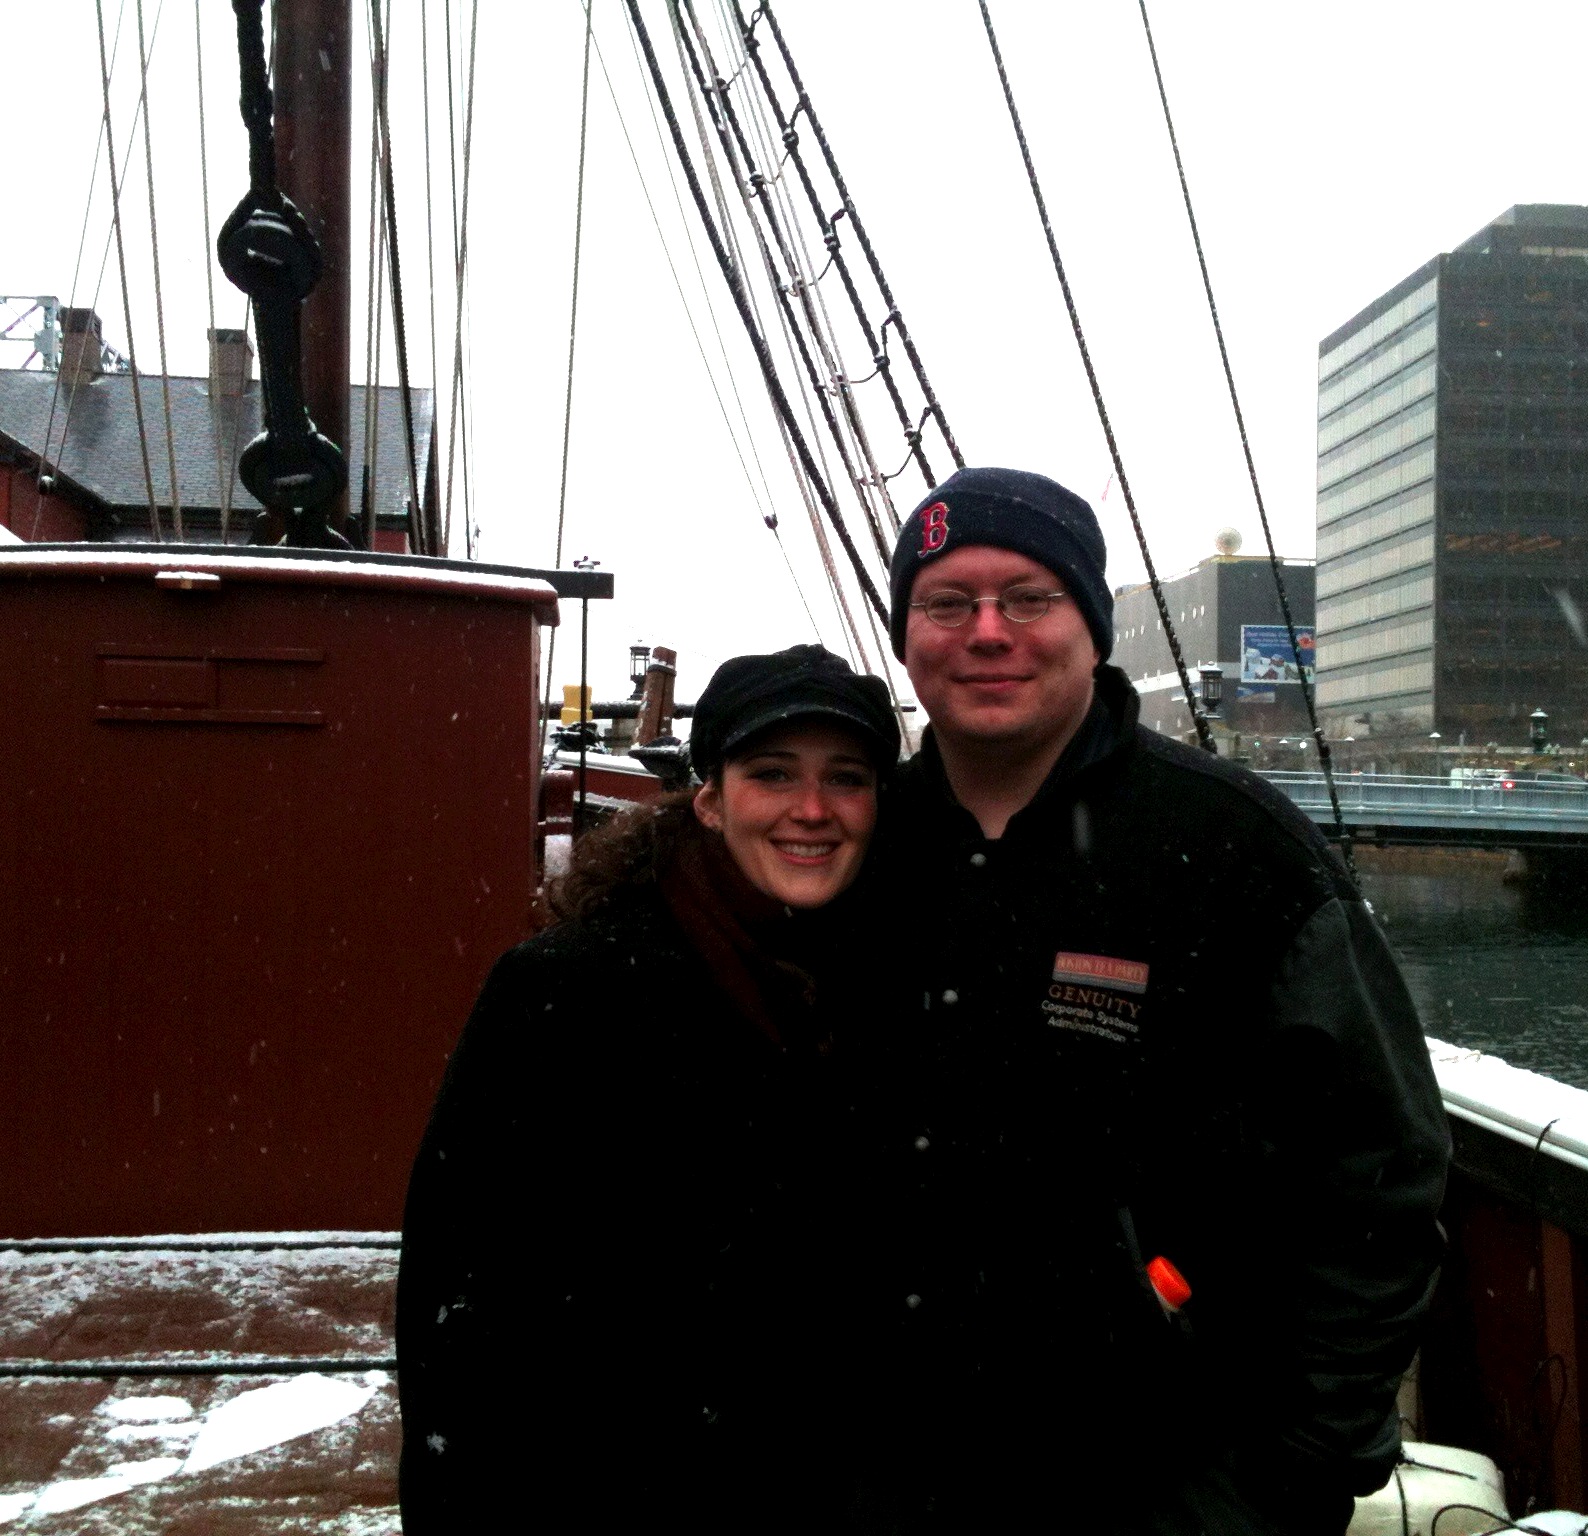 PiC and I on a boat this weekend past.  It was his birthday, so we threw tea into Boston harbor.  It seemed legit.